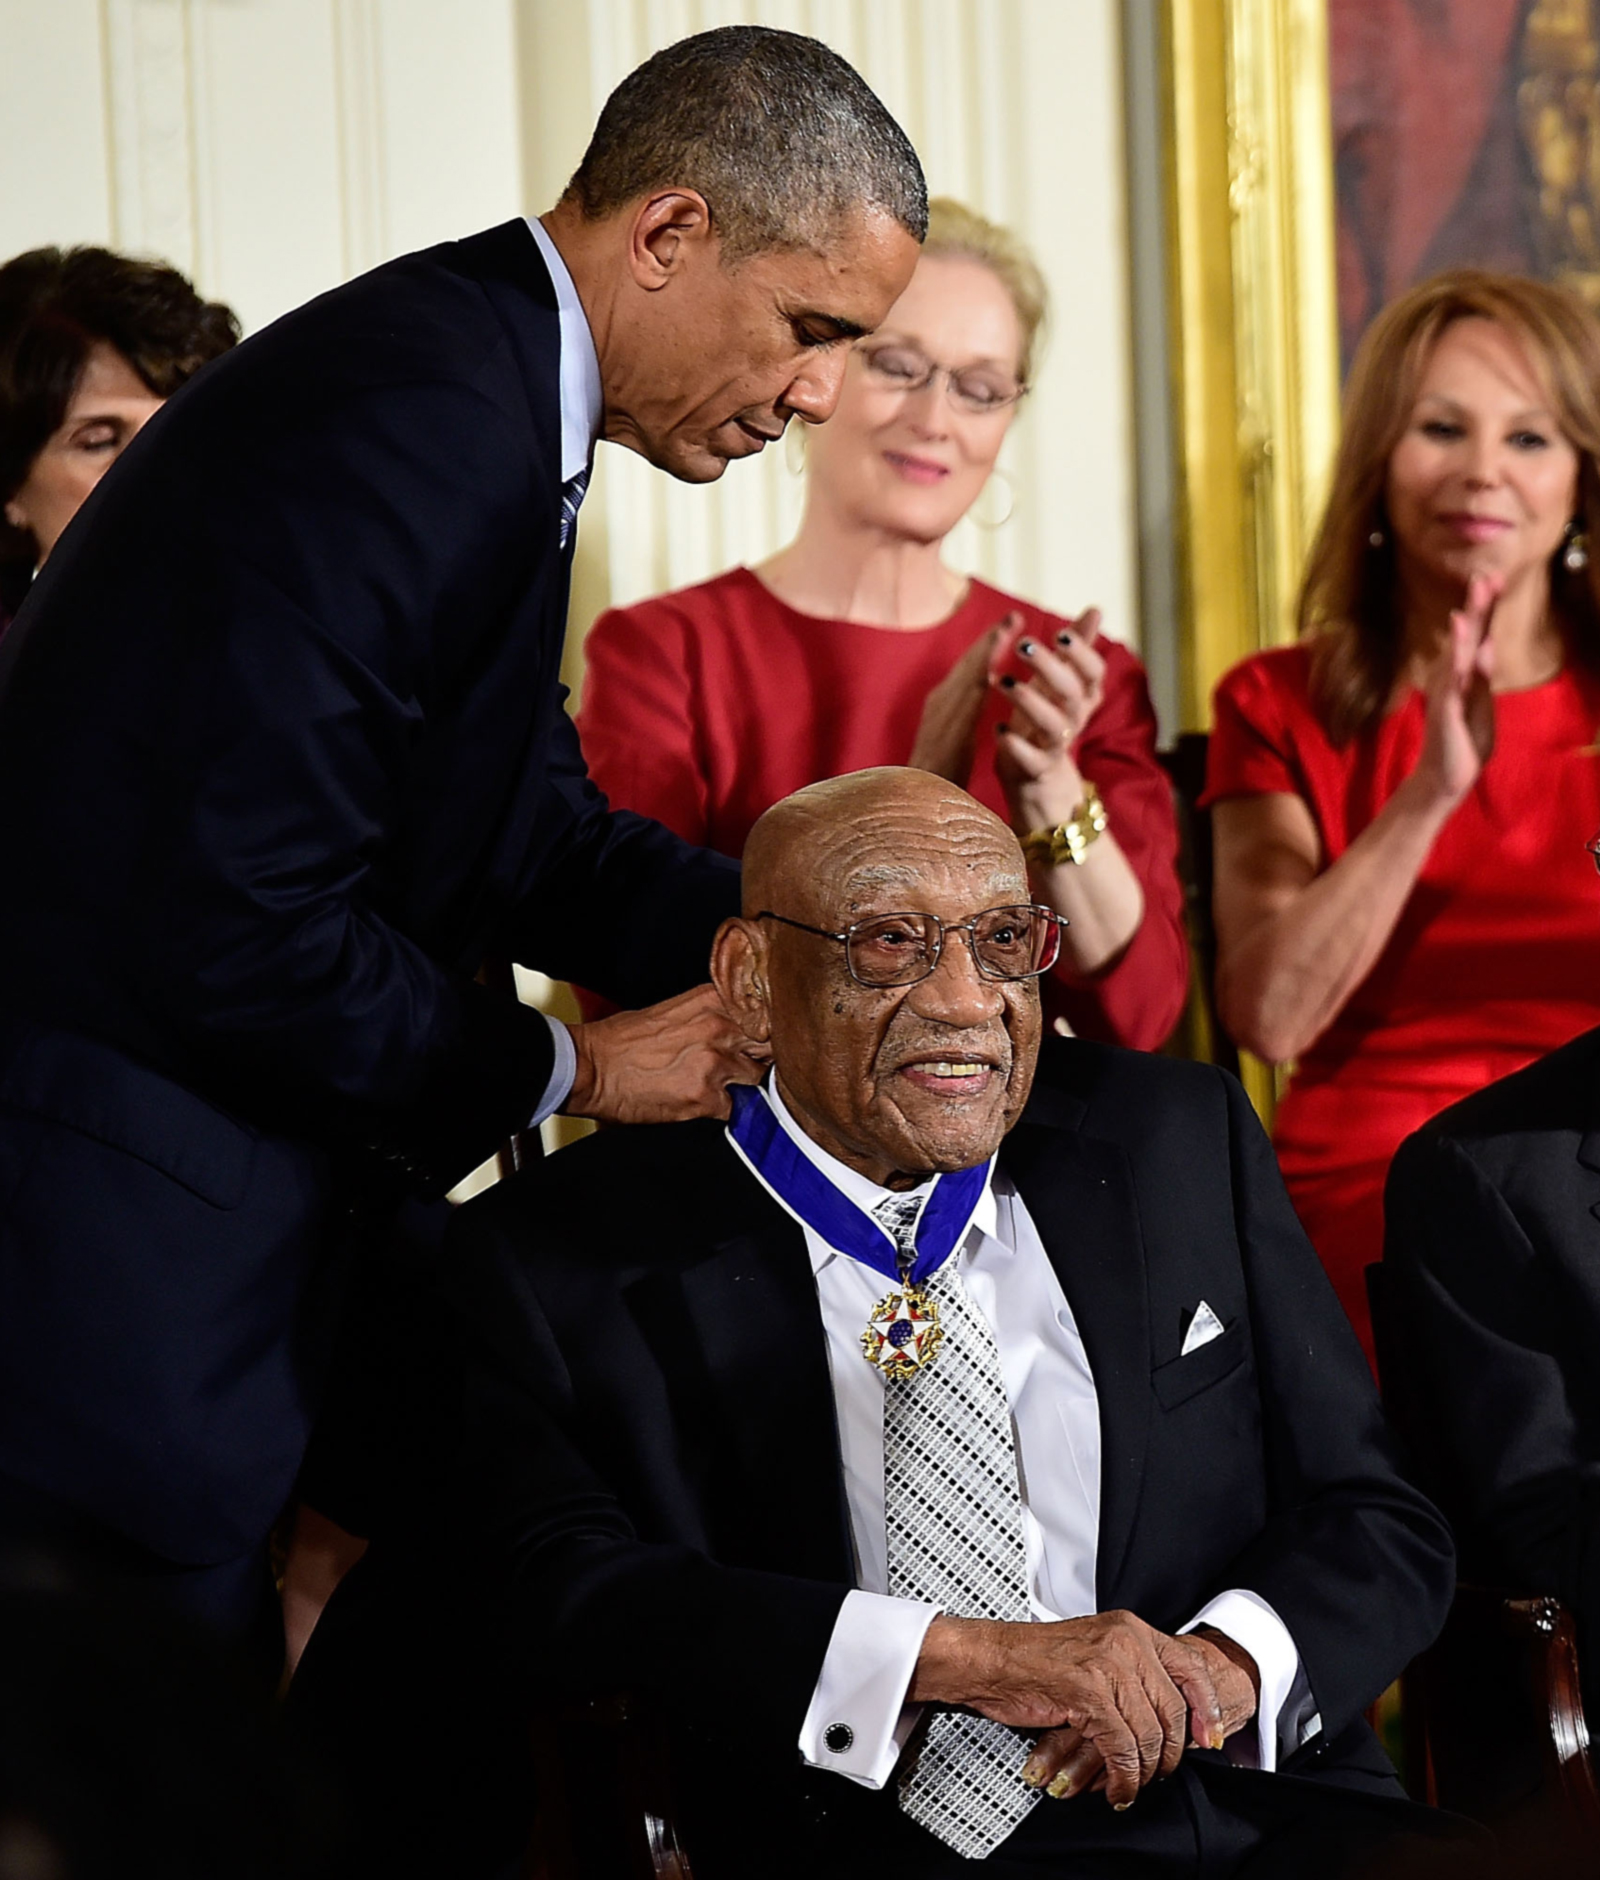 Sifford receives The Medal of Freedom from President Obama